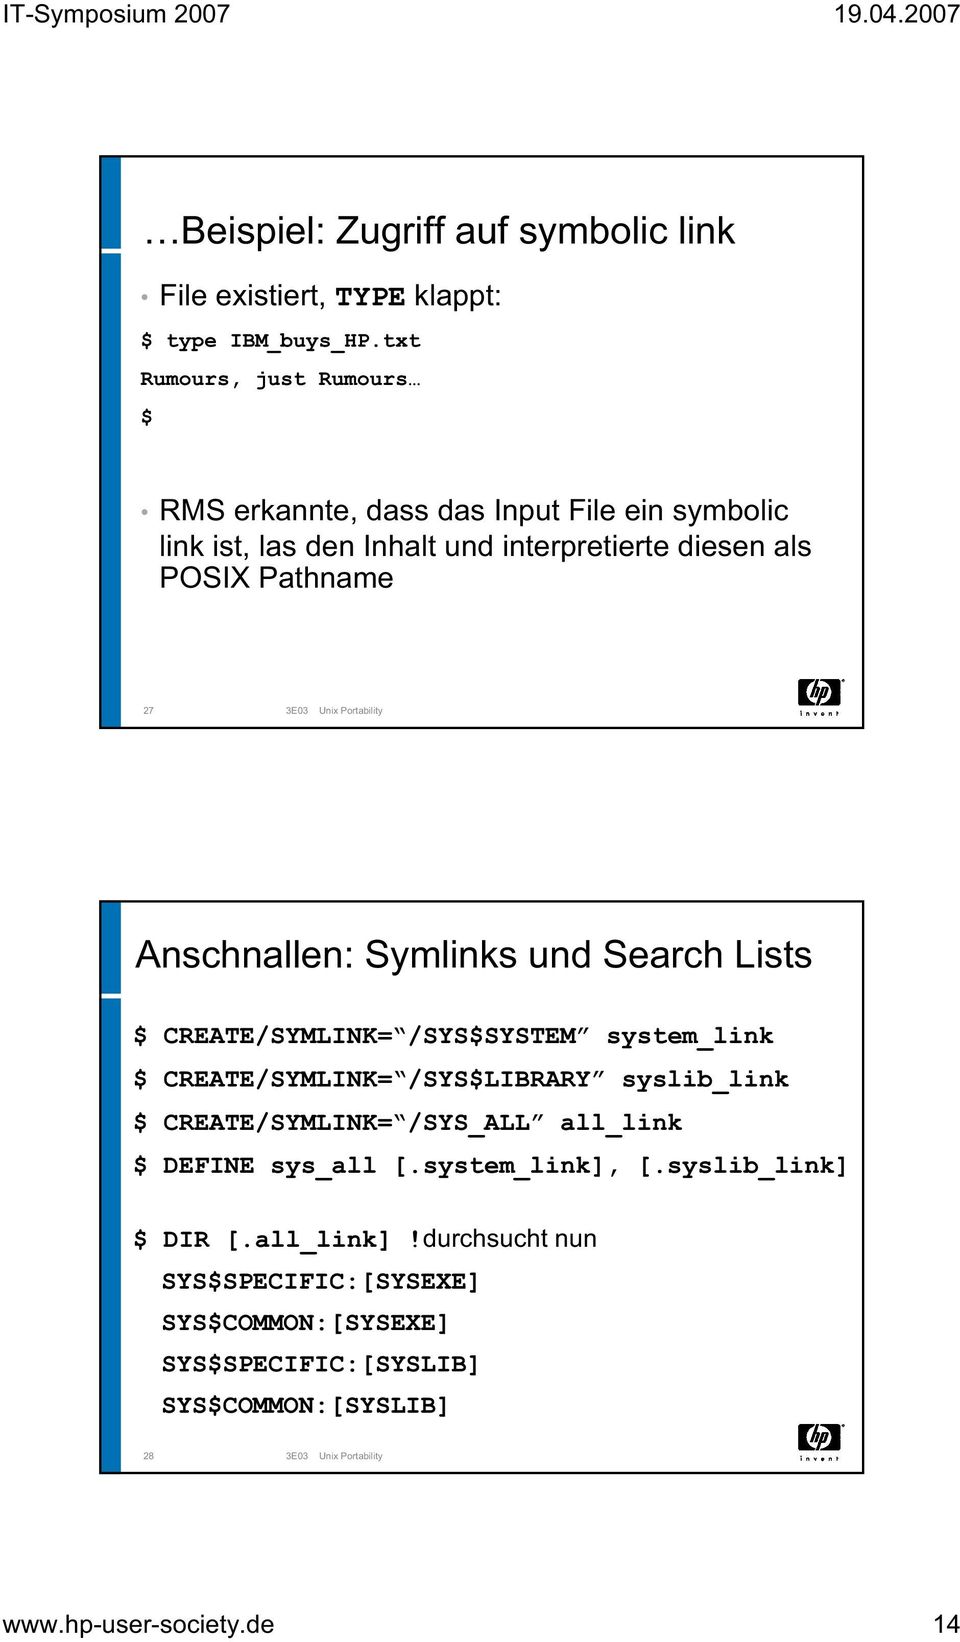 Portability Anschnallen: Symlinks und Search Lists $ CREATE/SYMLINK= /SYS$SYSTEM system_link $ CREATE/SYMLINK= /SYS$LIBRARY syslib_link $ CREATE/SYMLINK= /SYS_ALL